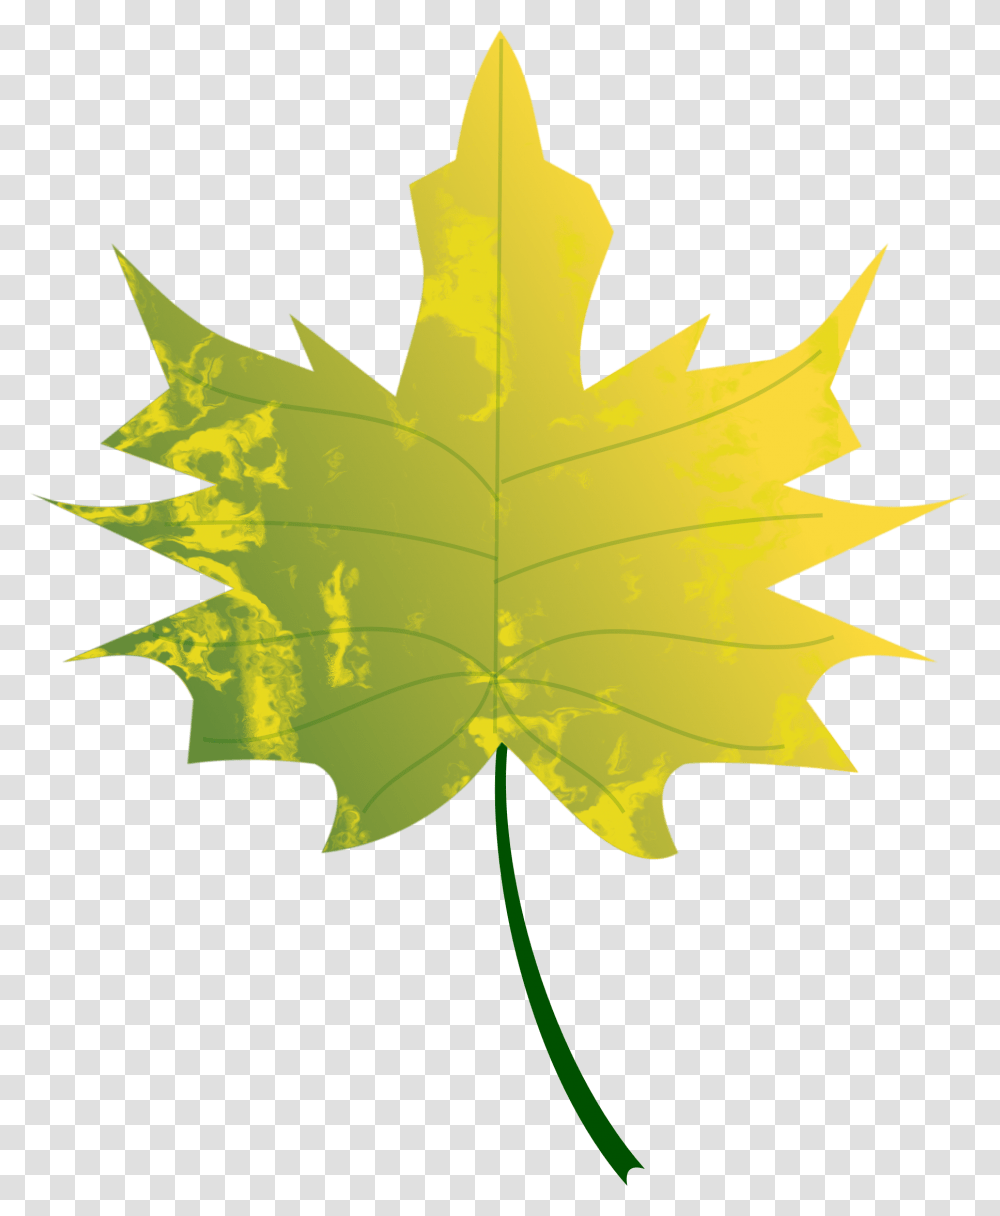 Autumn Leafs Clip Art Green Fall Leaves Clip Art, Plant, Maple Leaf, Tree Transparent Png